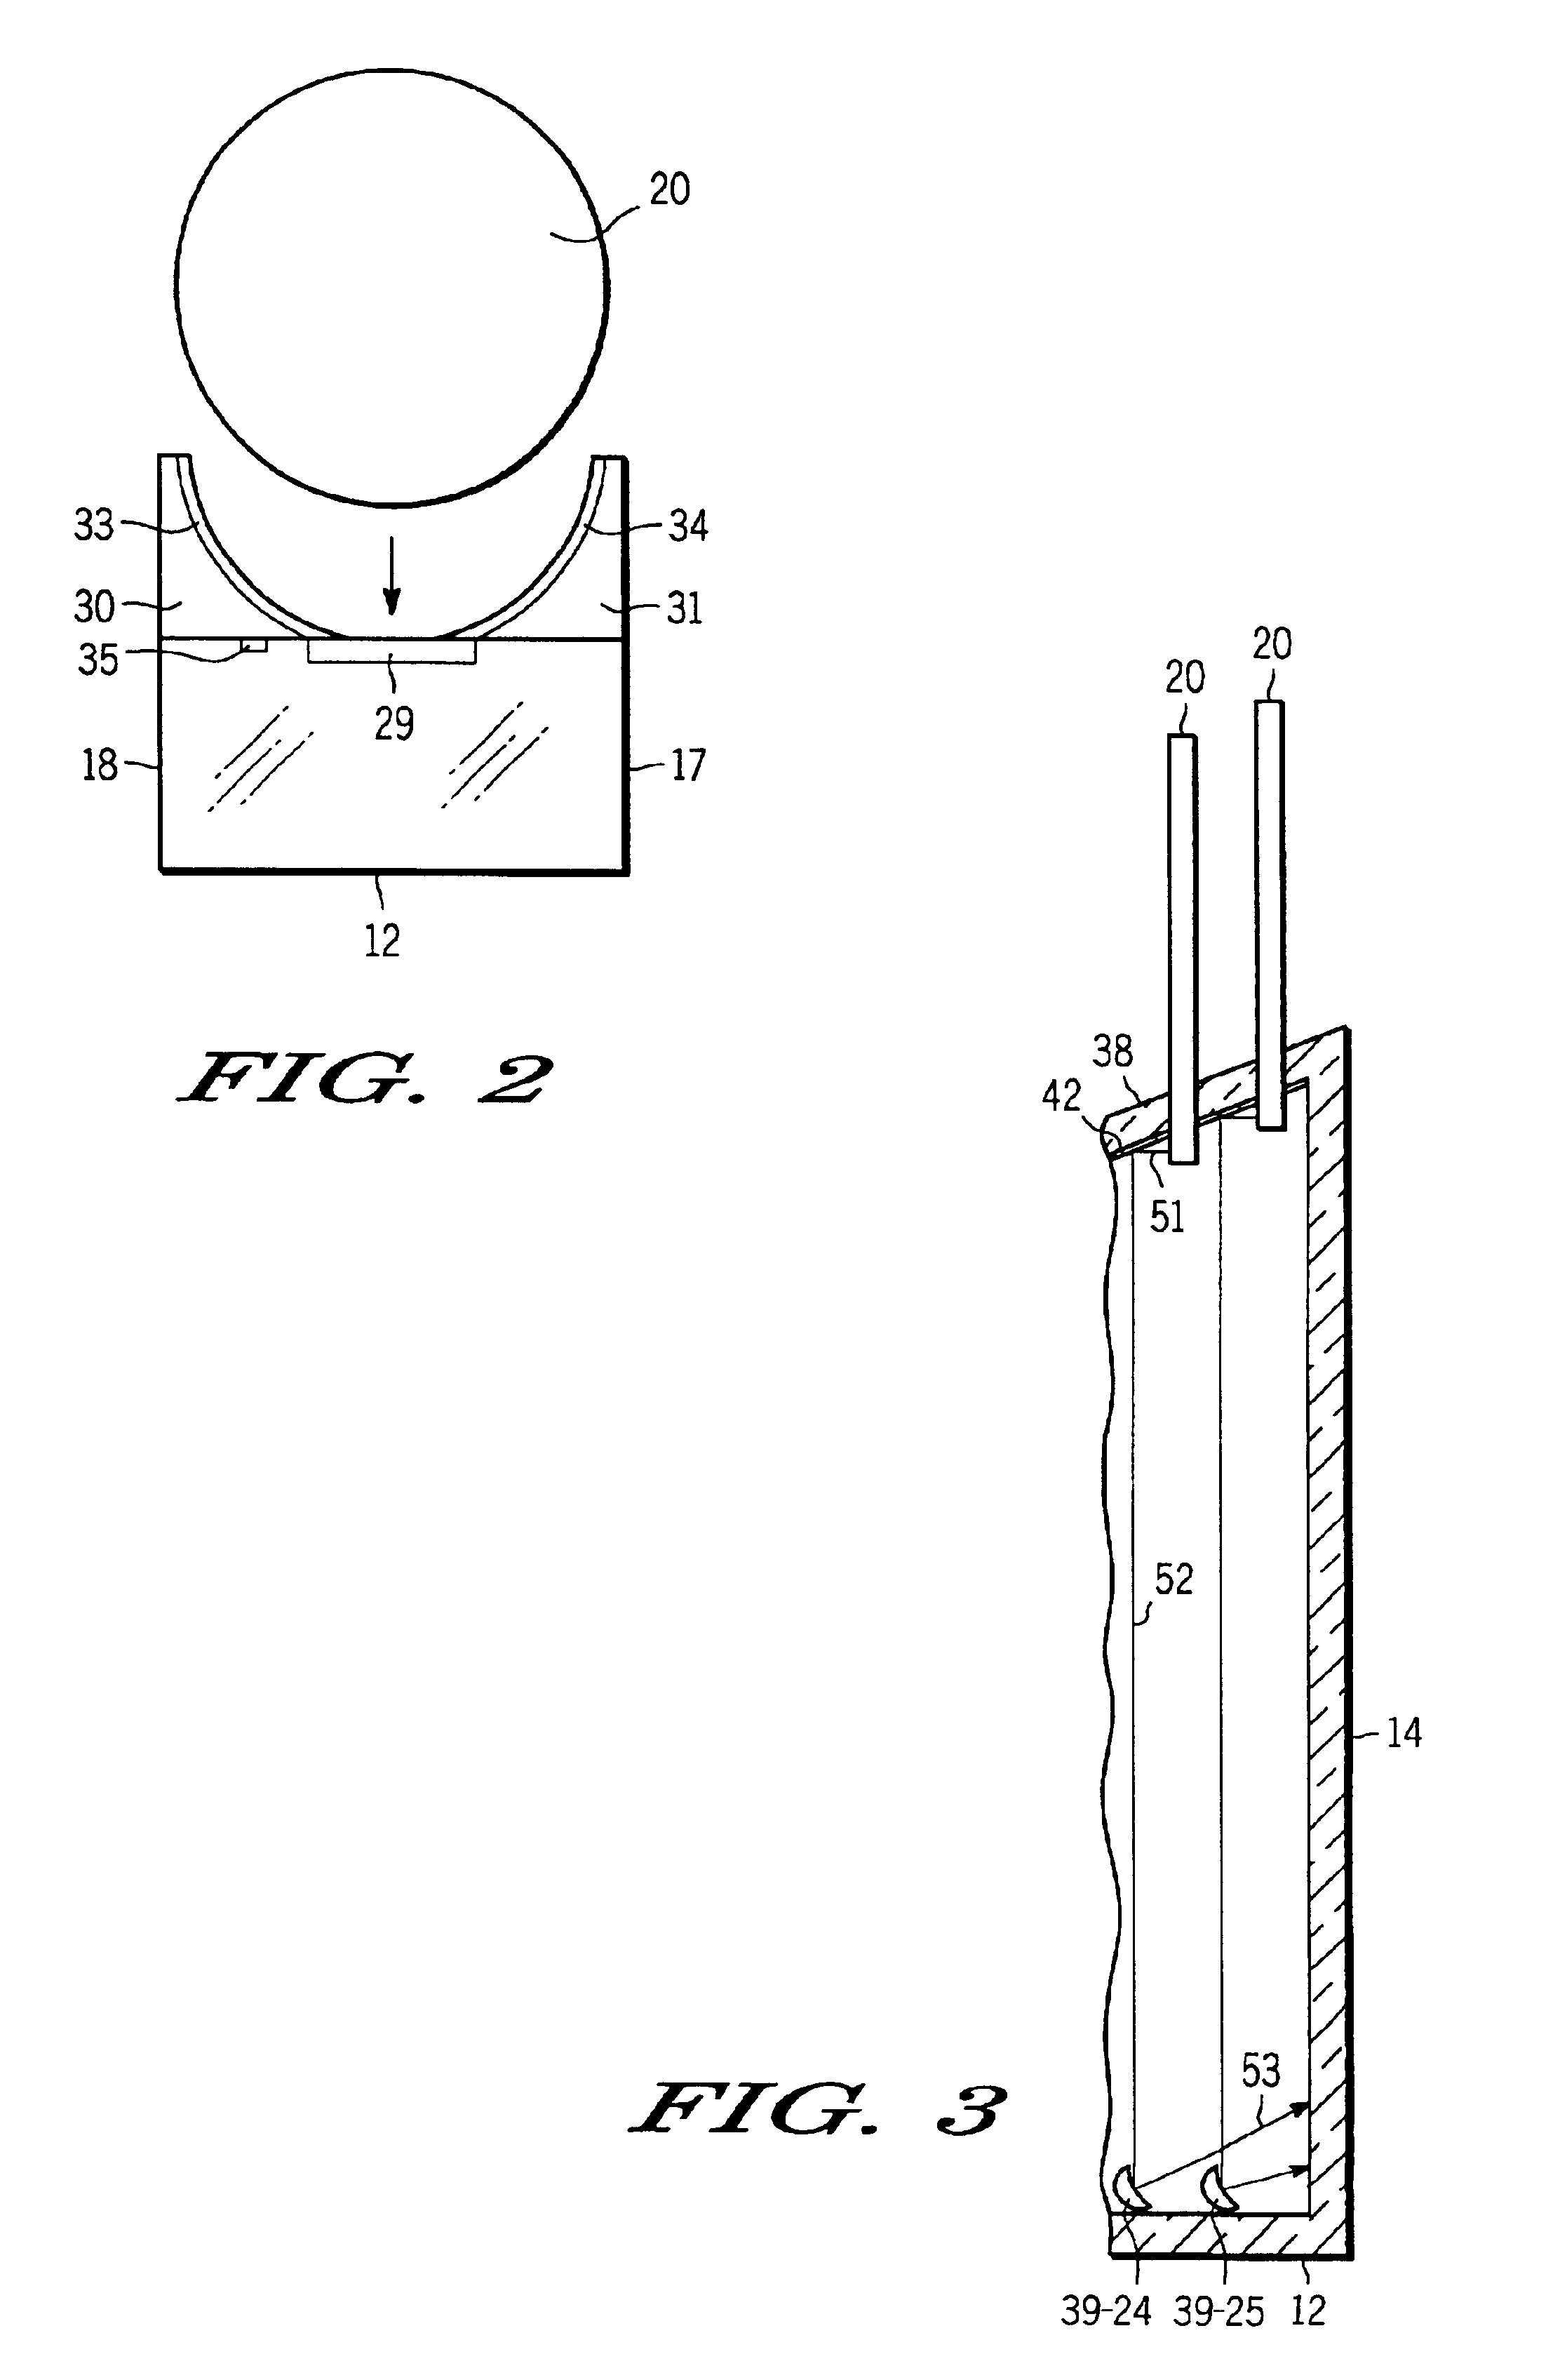 Apparatus for reading marks on a semiconductor substrate